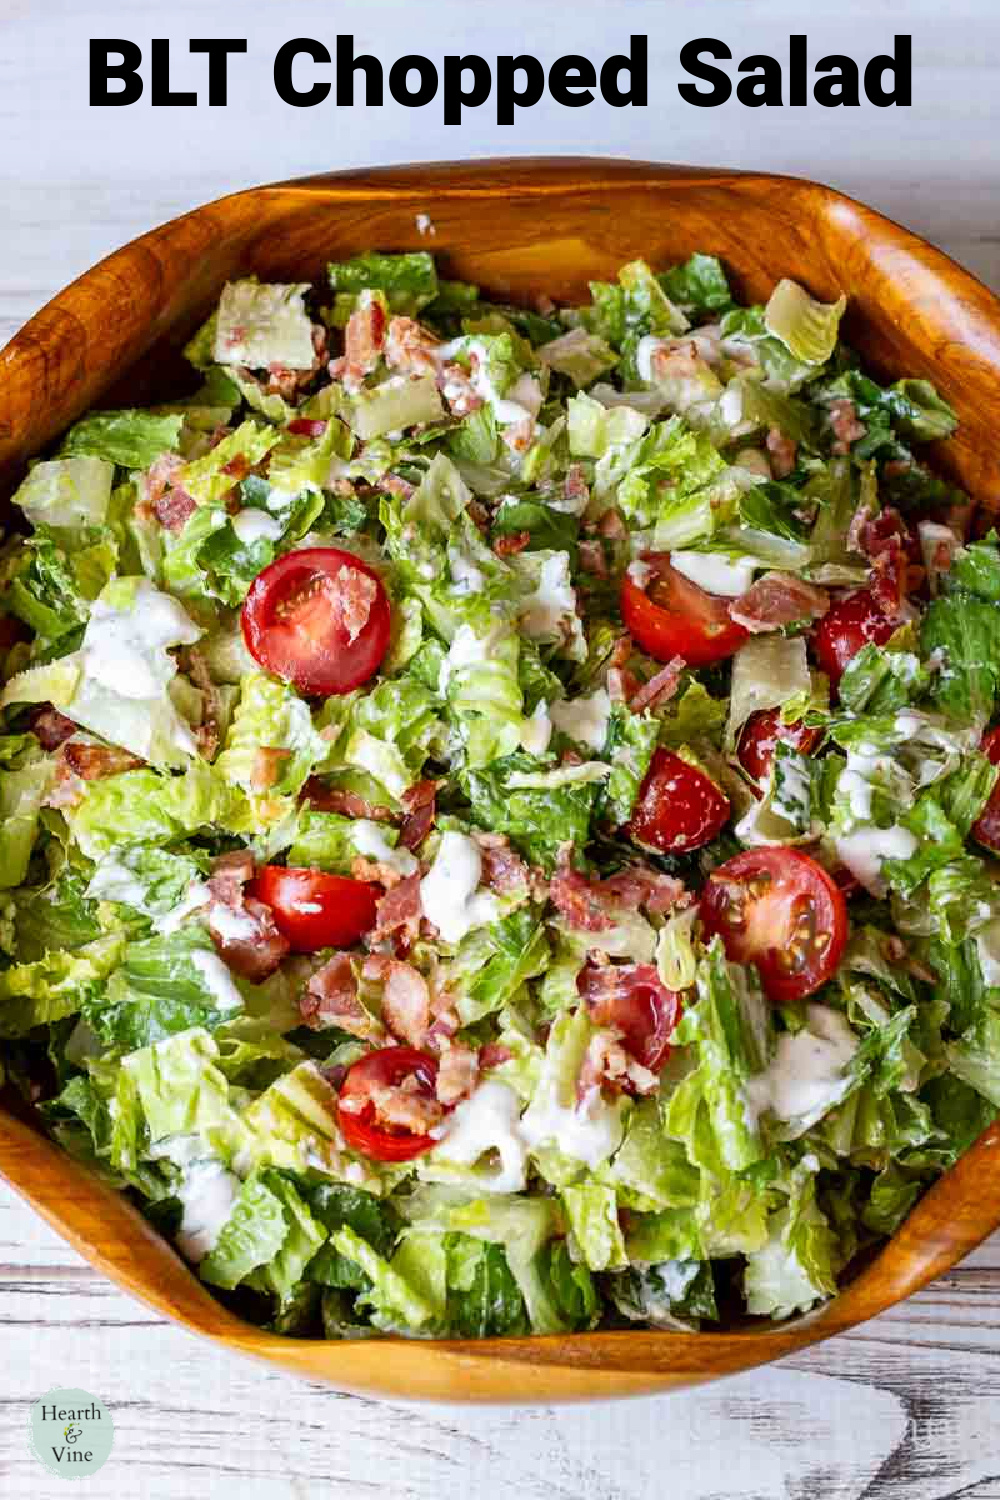 Large wooden salad bowl with a chopped bacon lettuce and tomato salad dressed with cream blue cheese dressing.